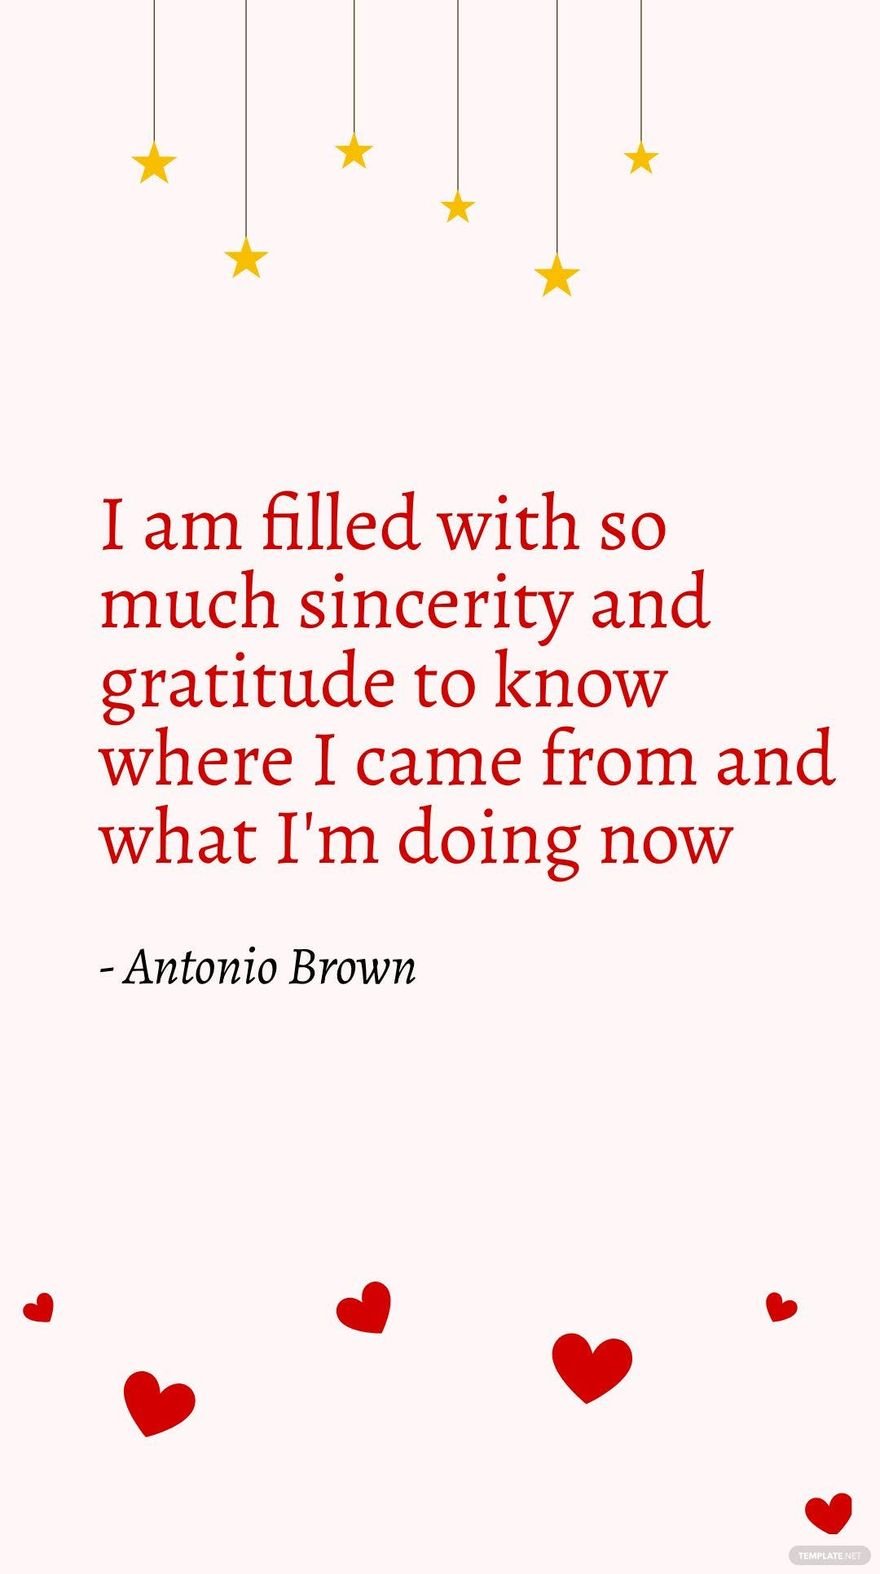 Free Antonio Brown- I am filled with so much sincerity and gratitude to know where I came from and what I'm doing now in JPG